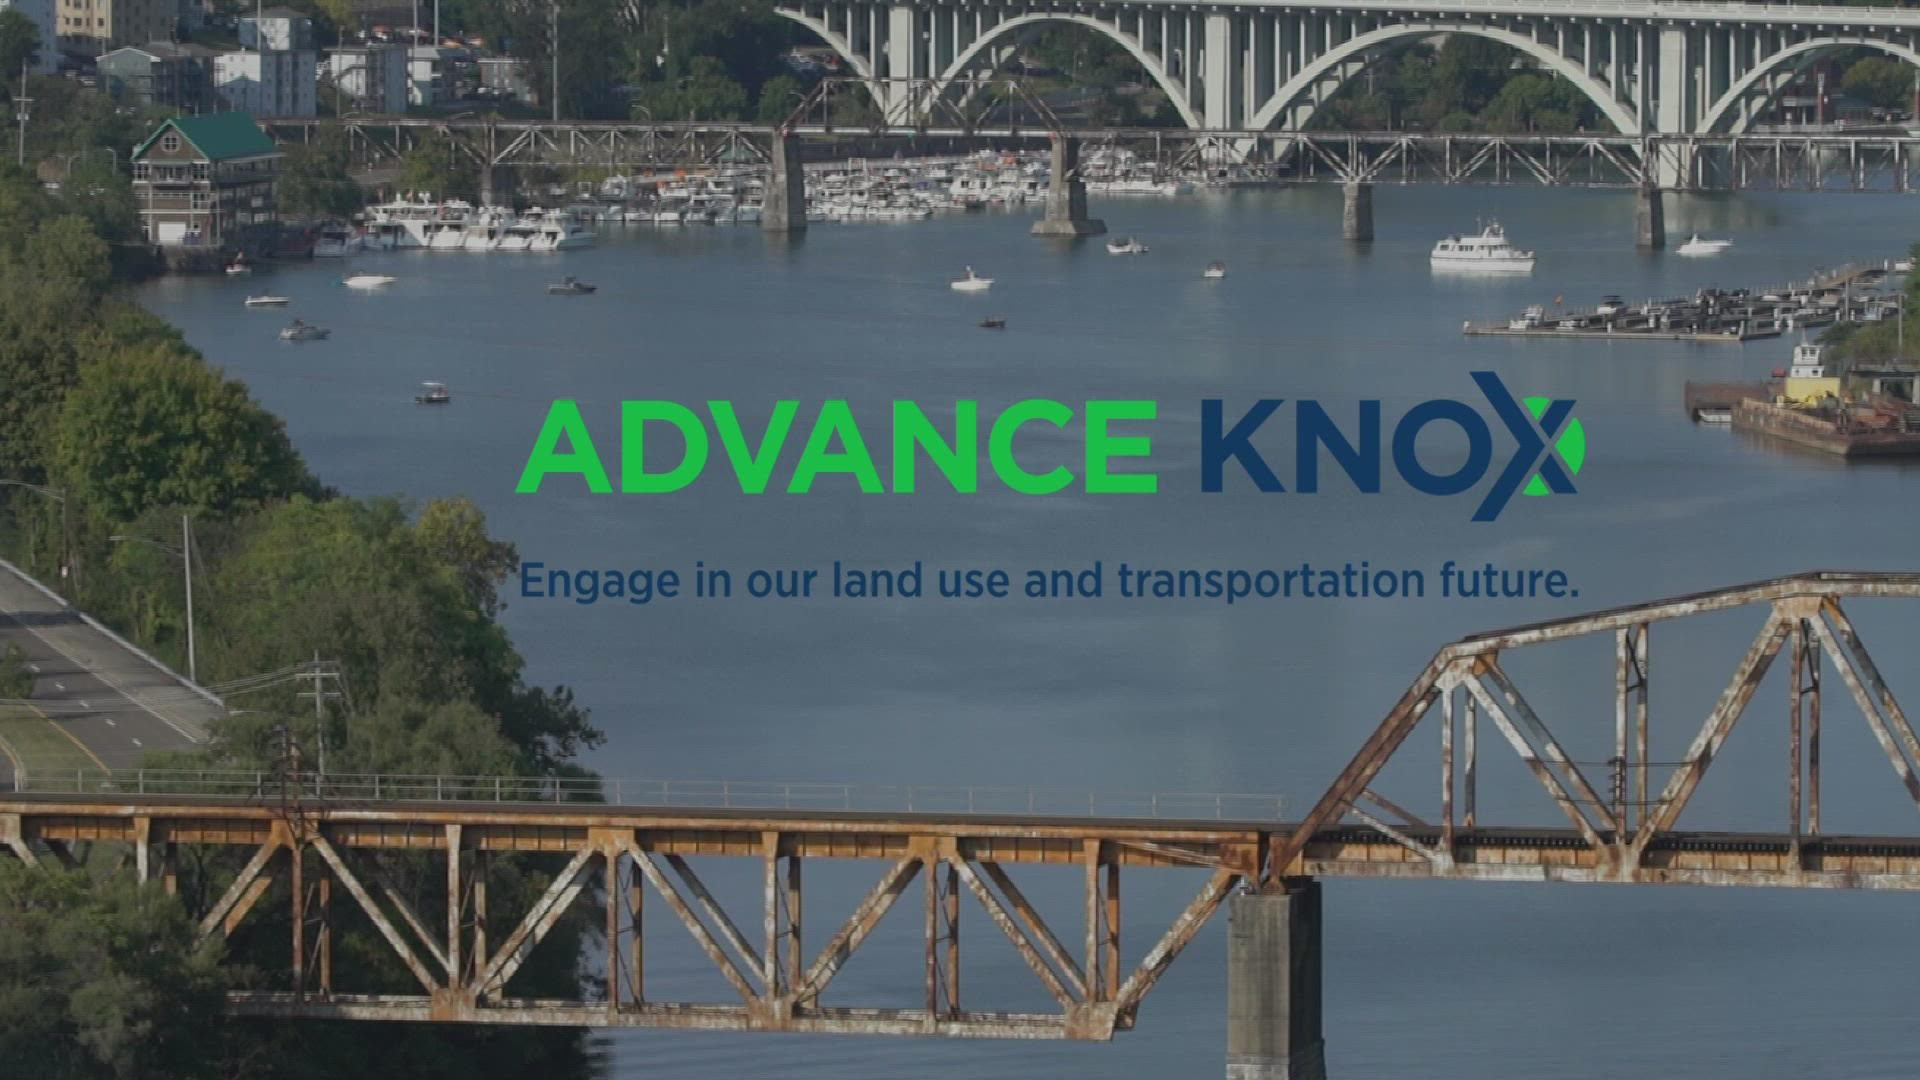 Advance Knox is an effort to create a specific and solid vision to guide the county's growth over the next 20 years.